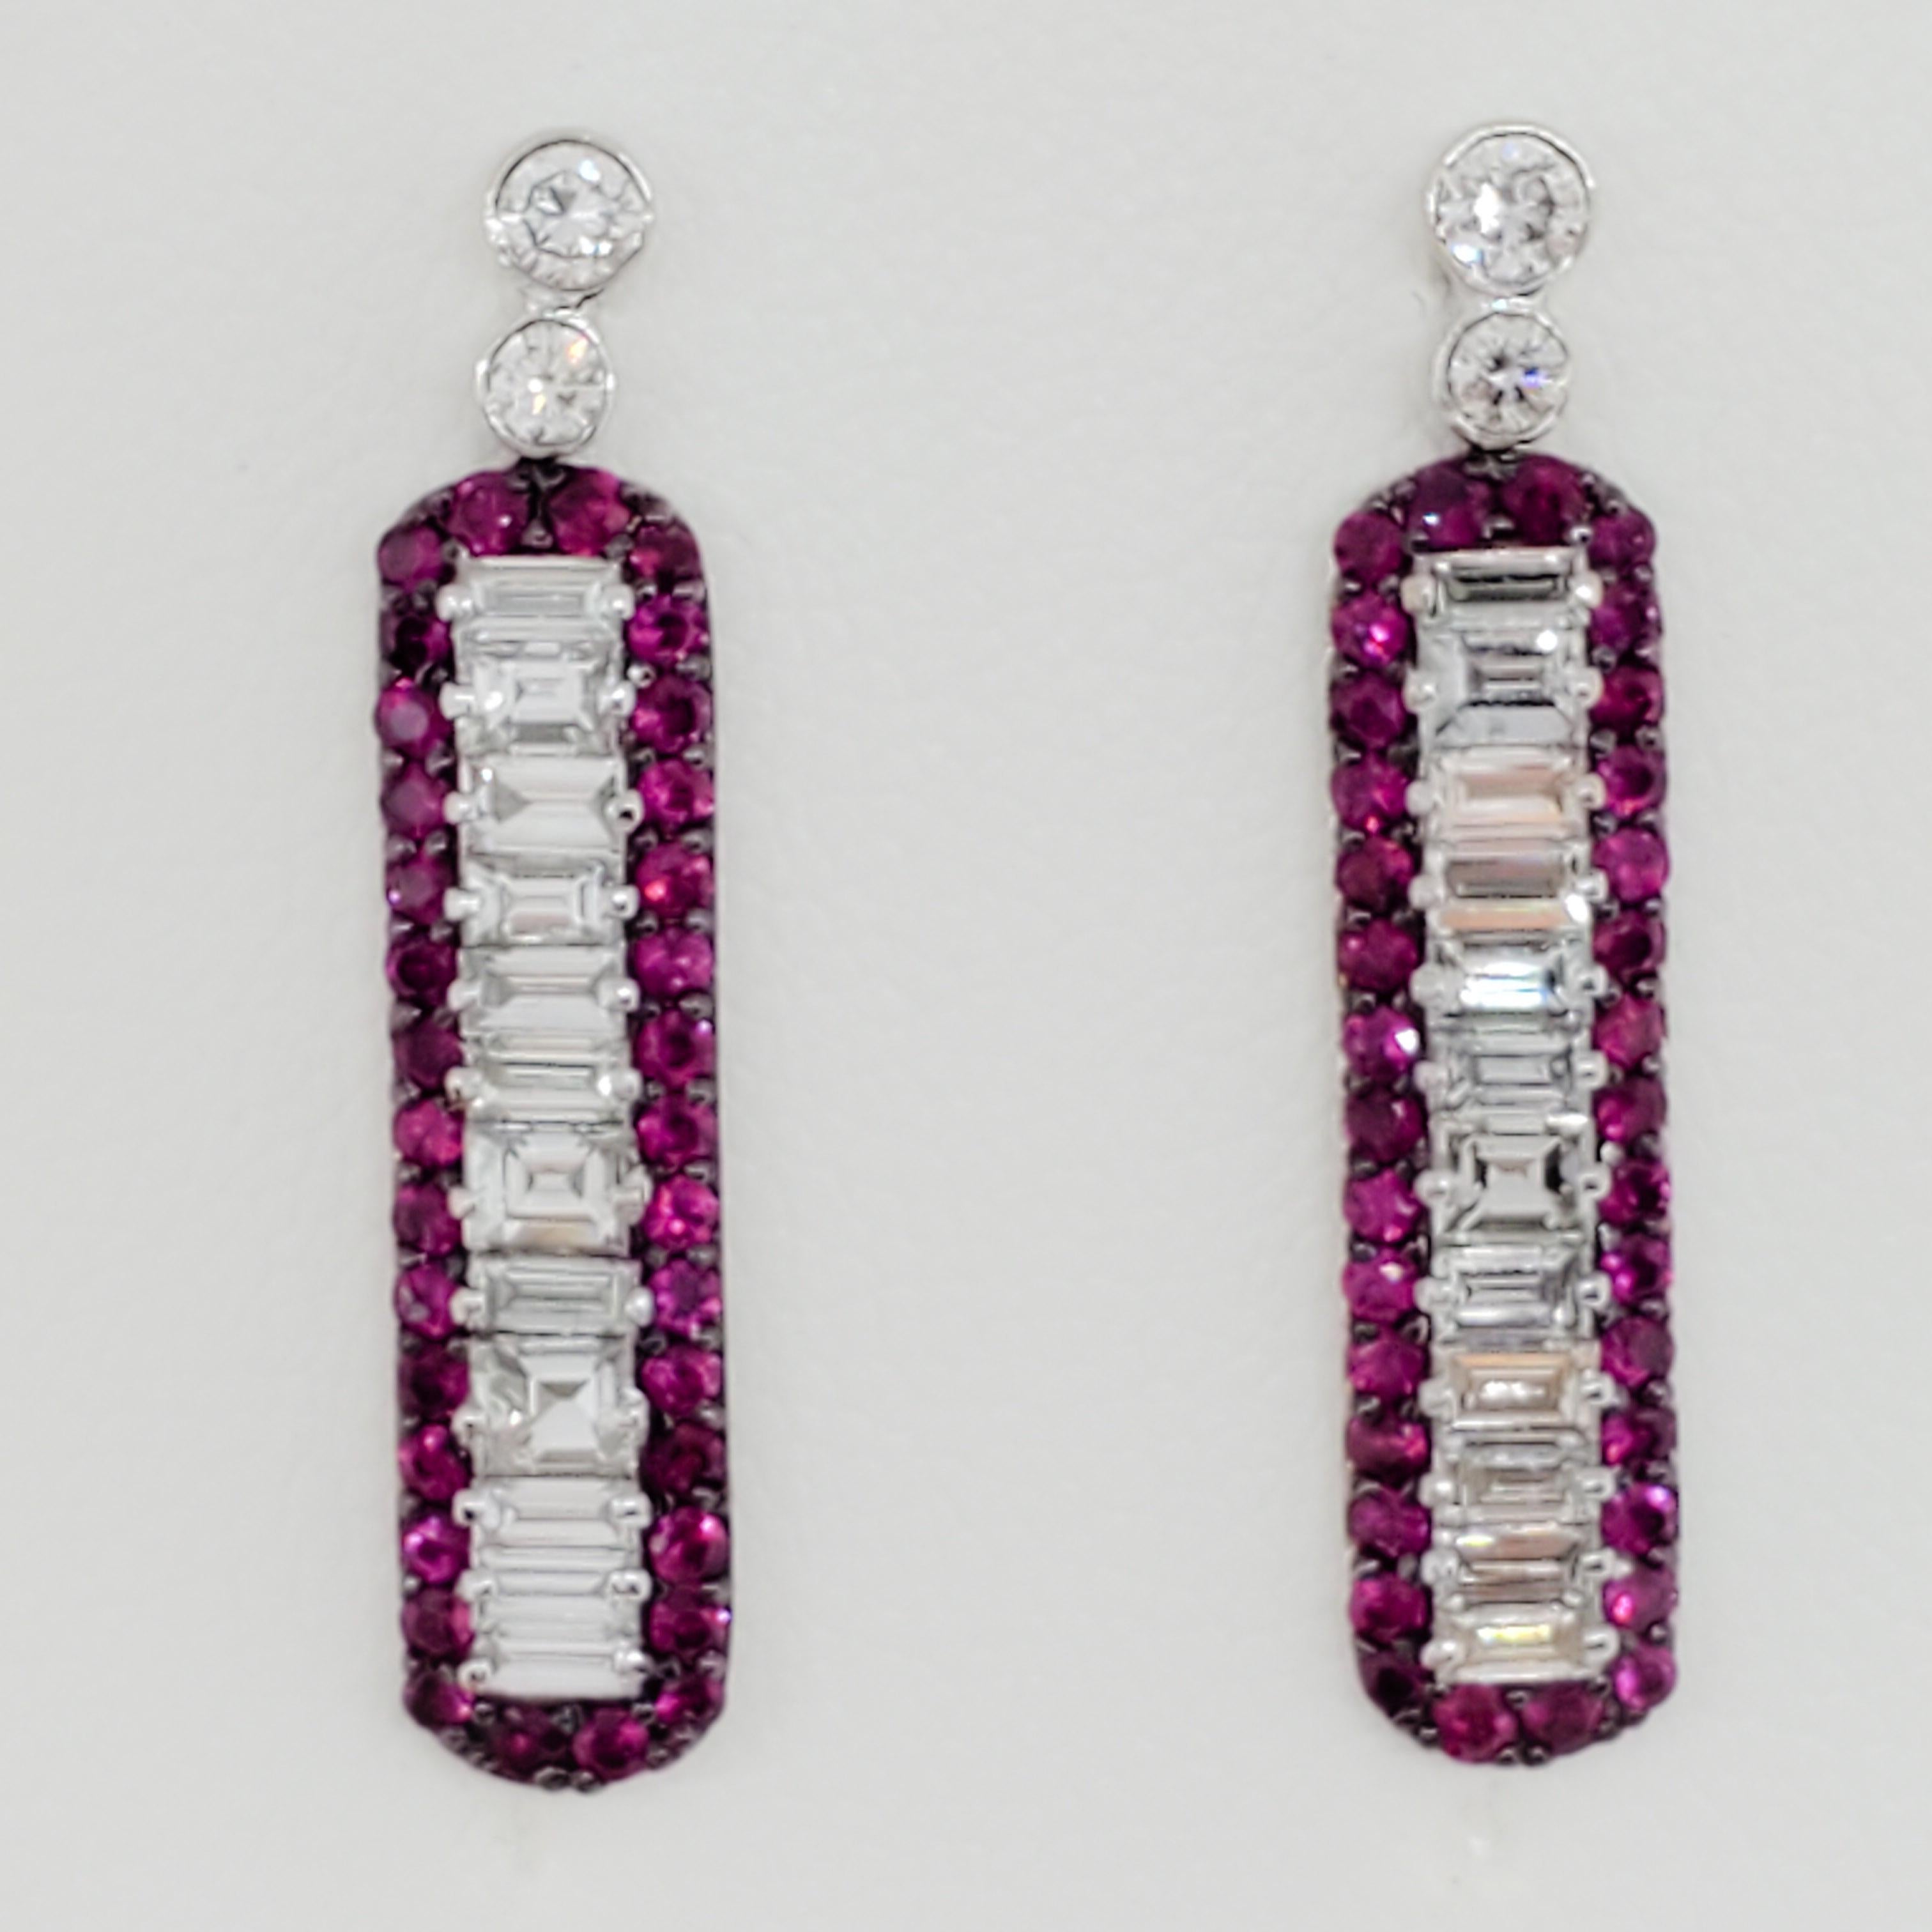 Gorgeous earrings featuring 1.24 ct. of good quality, white, and bright baguette diamonds with 0.90 ct. of deep red ruby rounds.  Handmade 18k white gold mounting.